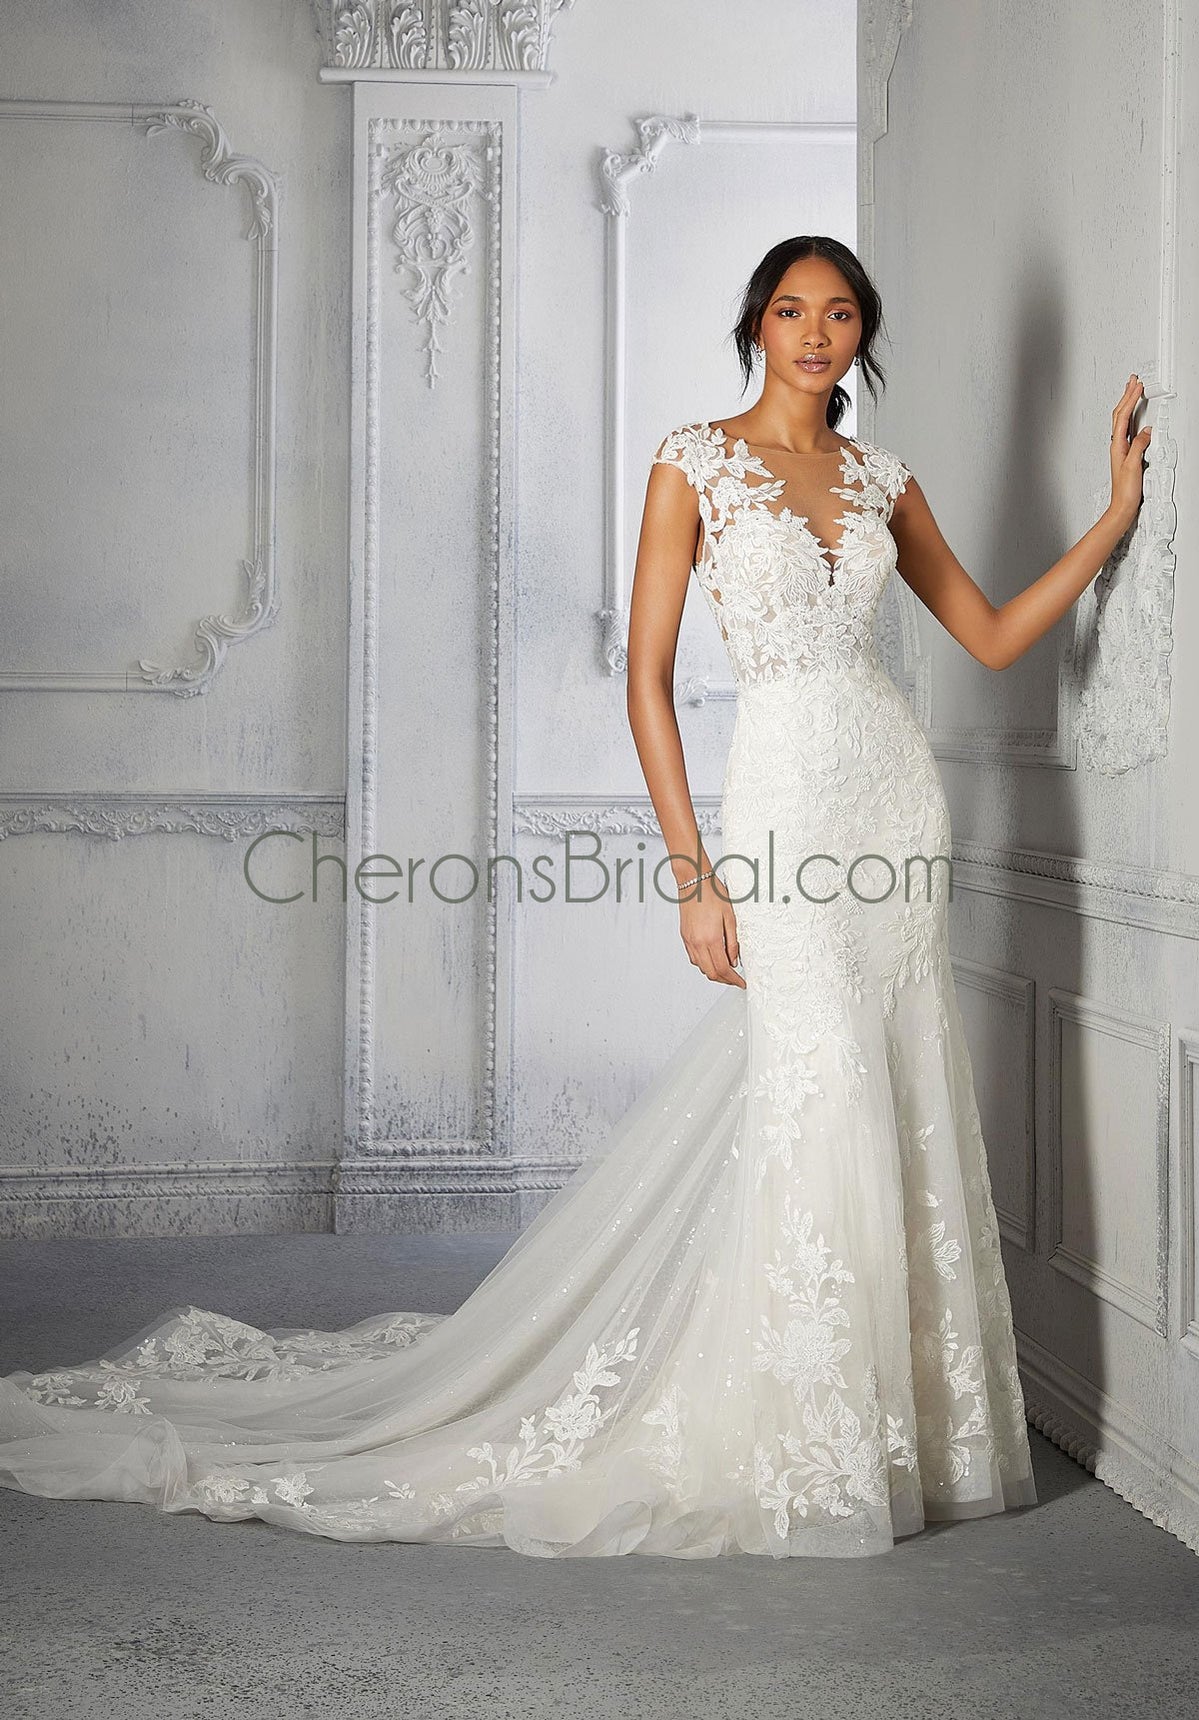 Morilee - 2362 - Cecilia - Cheron's Bridal, Wedding Gown - Morilee Line - - Wedding Gowns Dresses Chattanooga Hixson Shops Boutiques Tennessee TN Georgia GA MSRP Lowest Prices Sale Discount